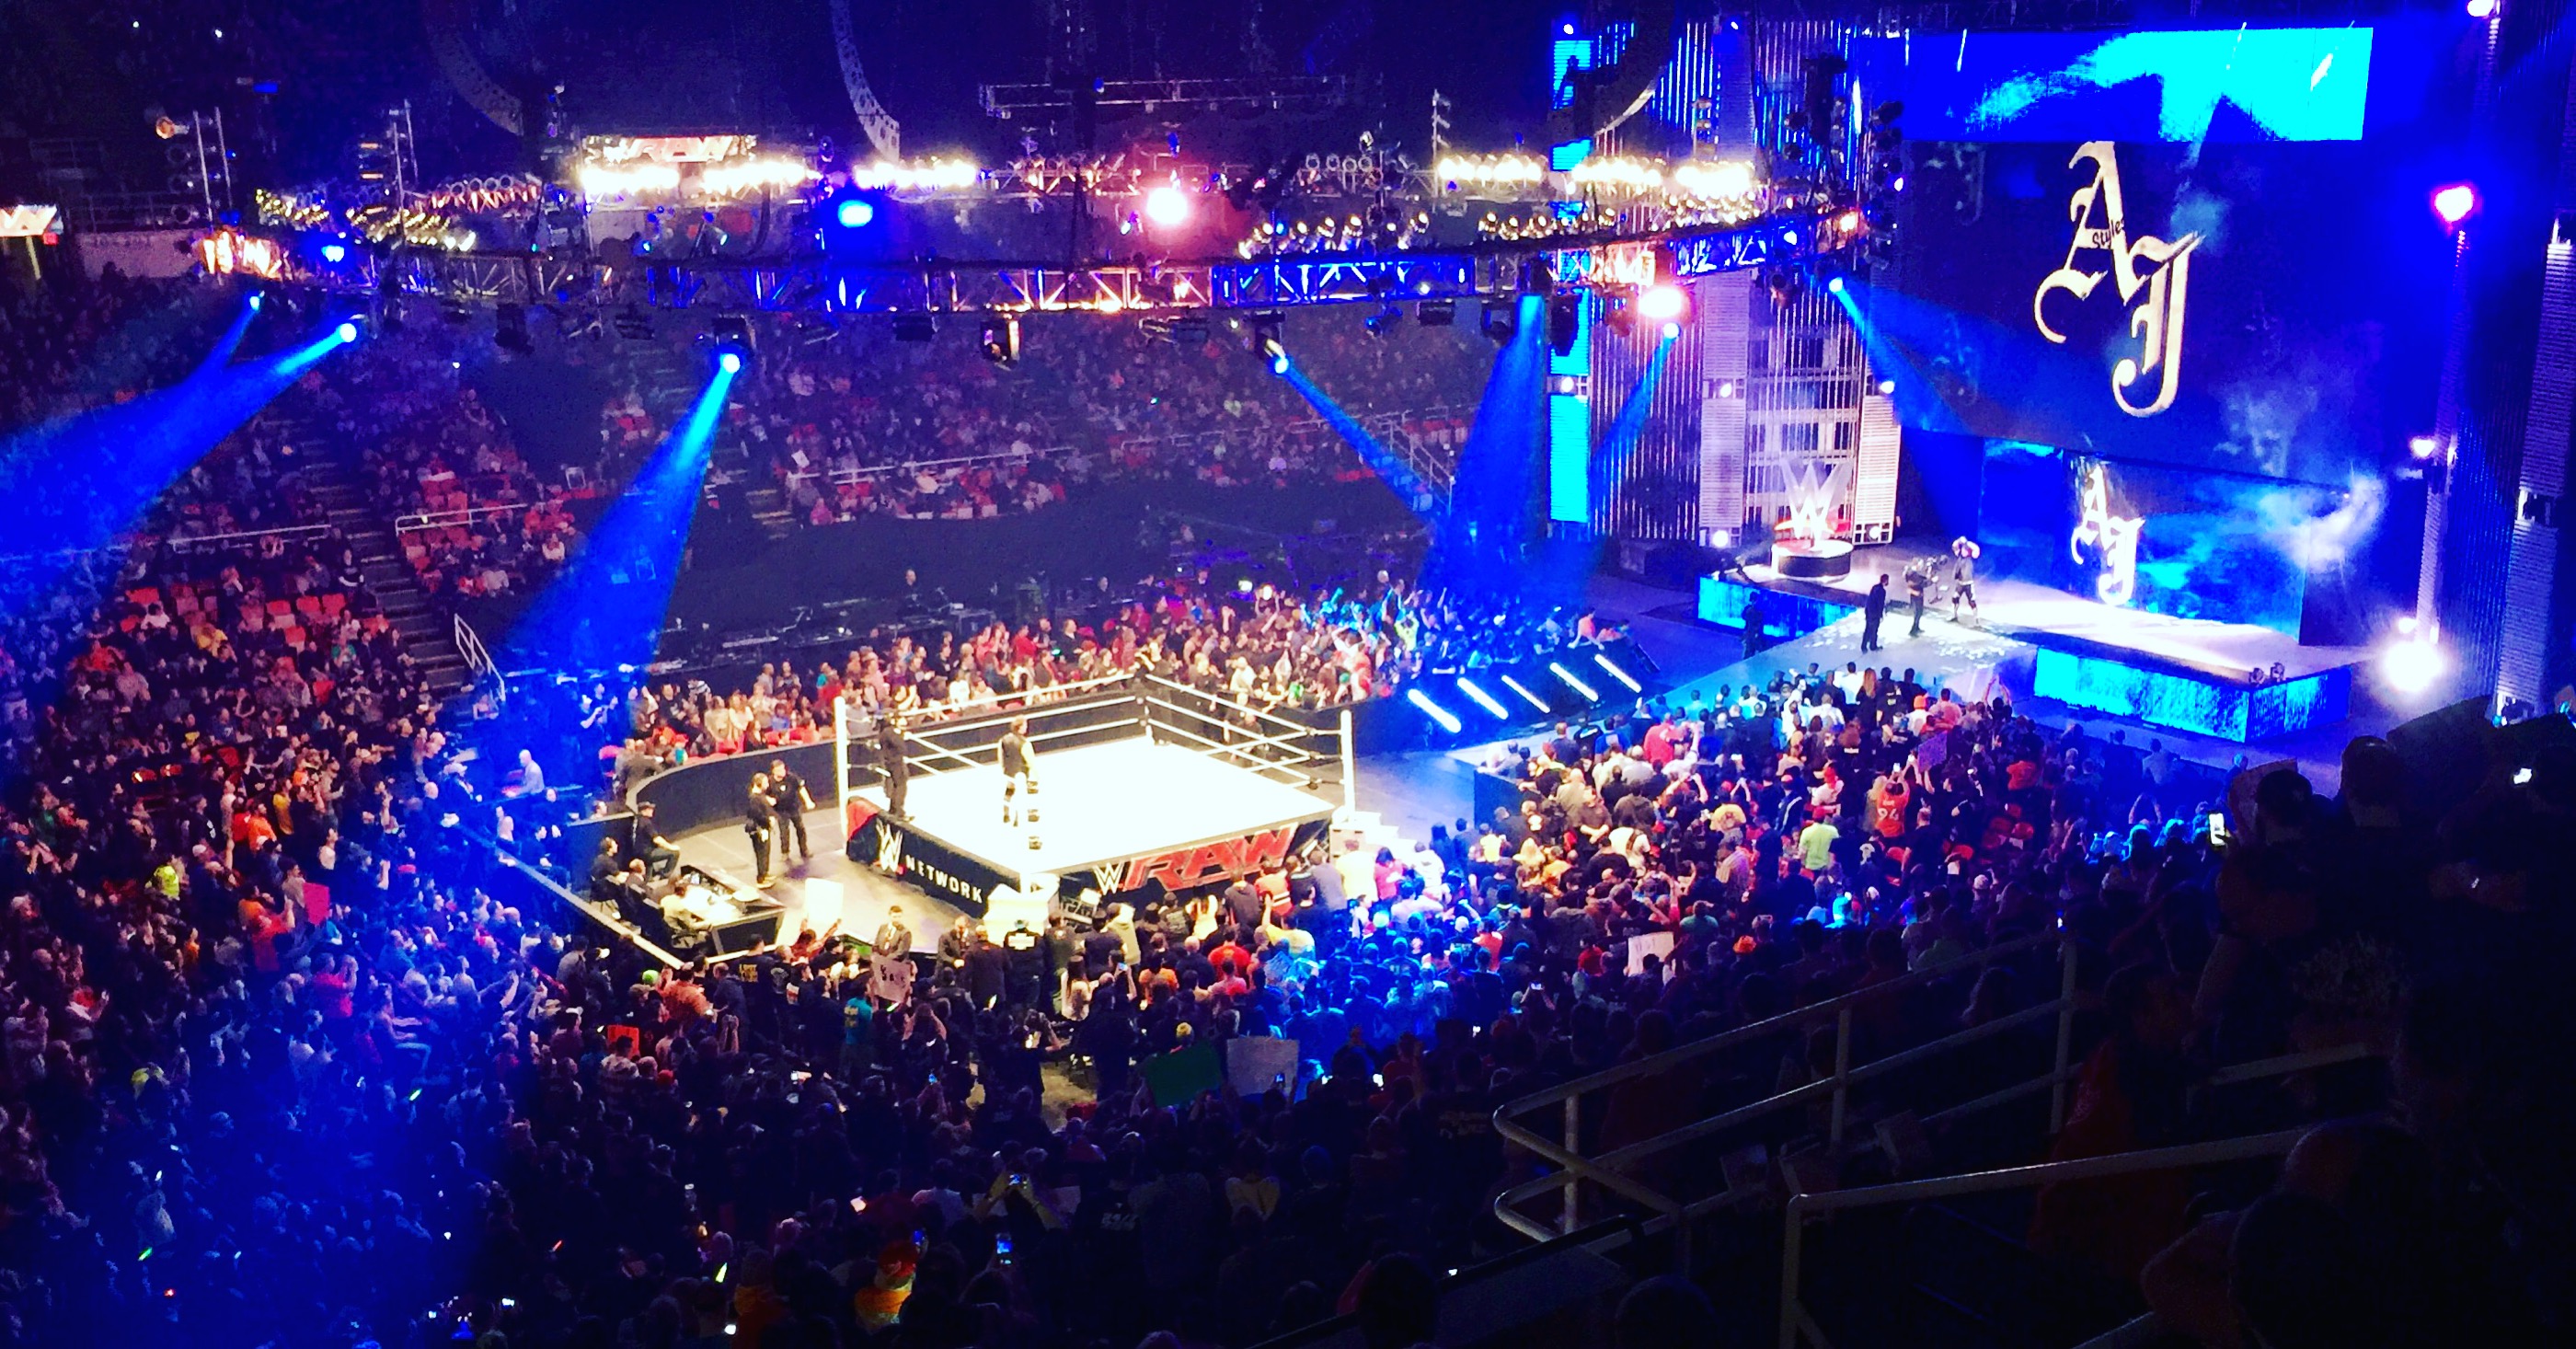 PHOTOS: The Monday Night War Podcast Channel is LIVE from Monday